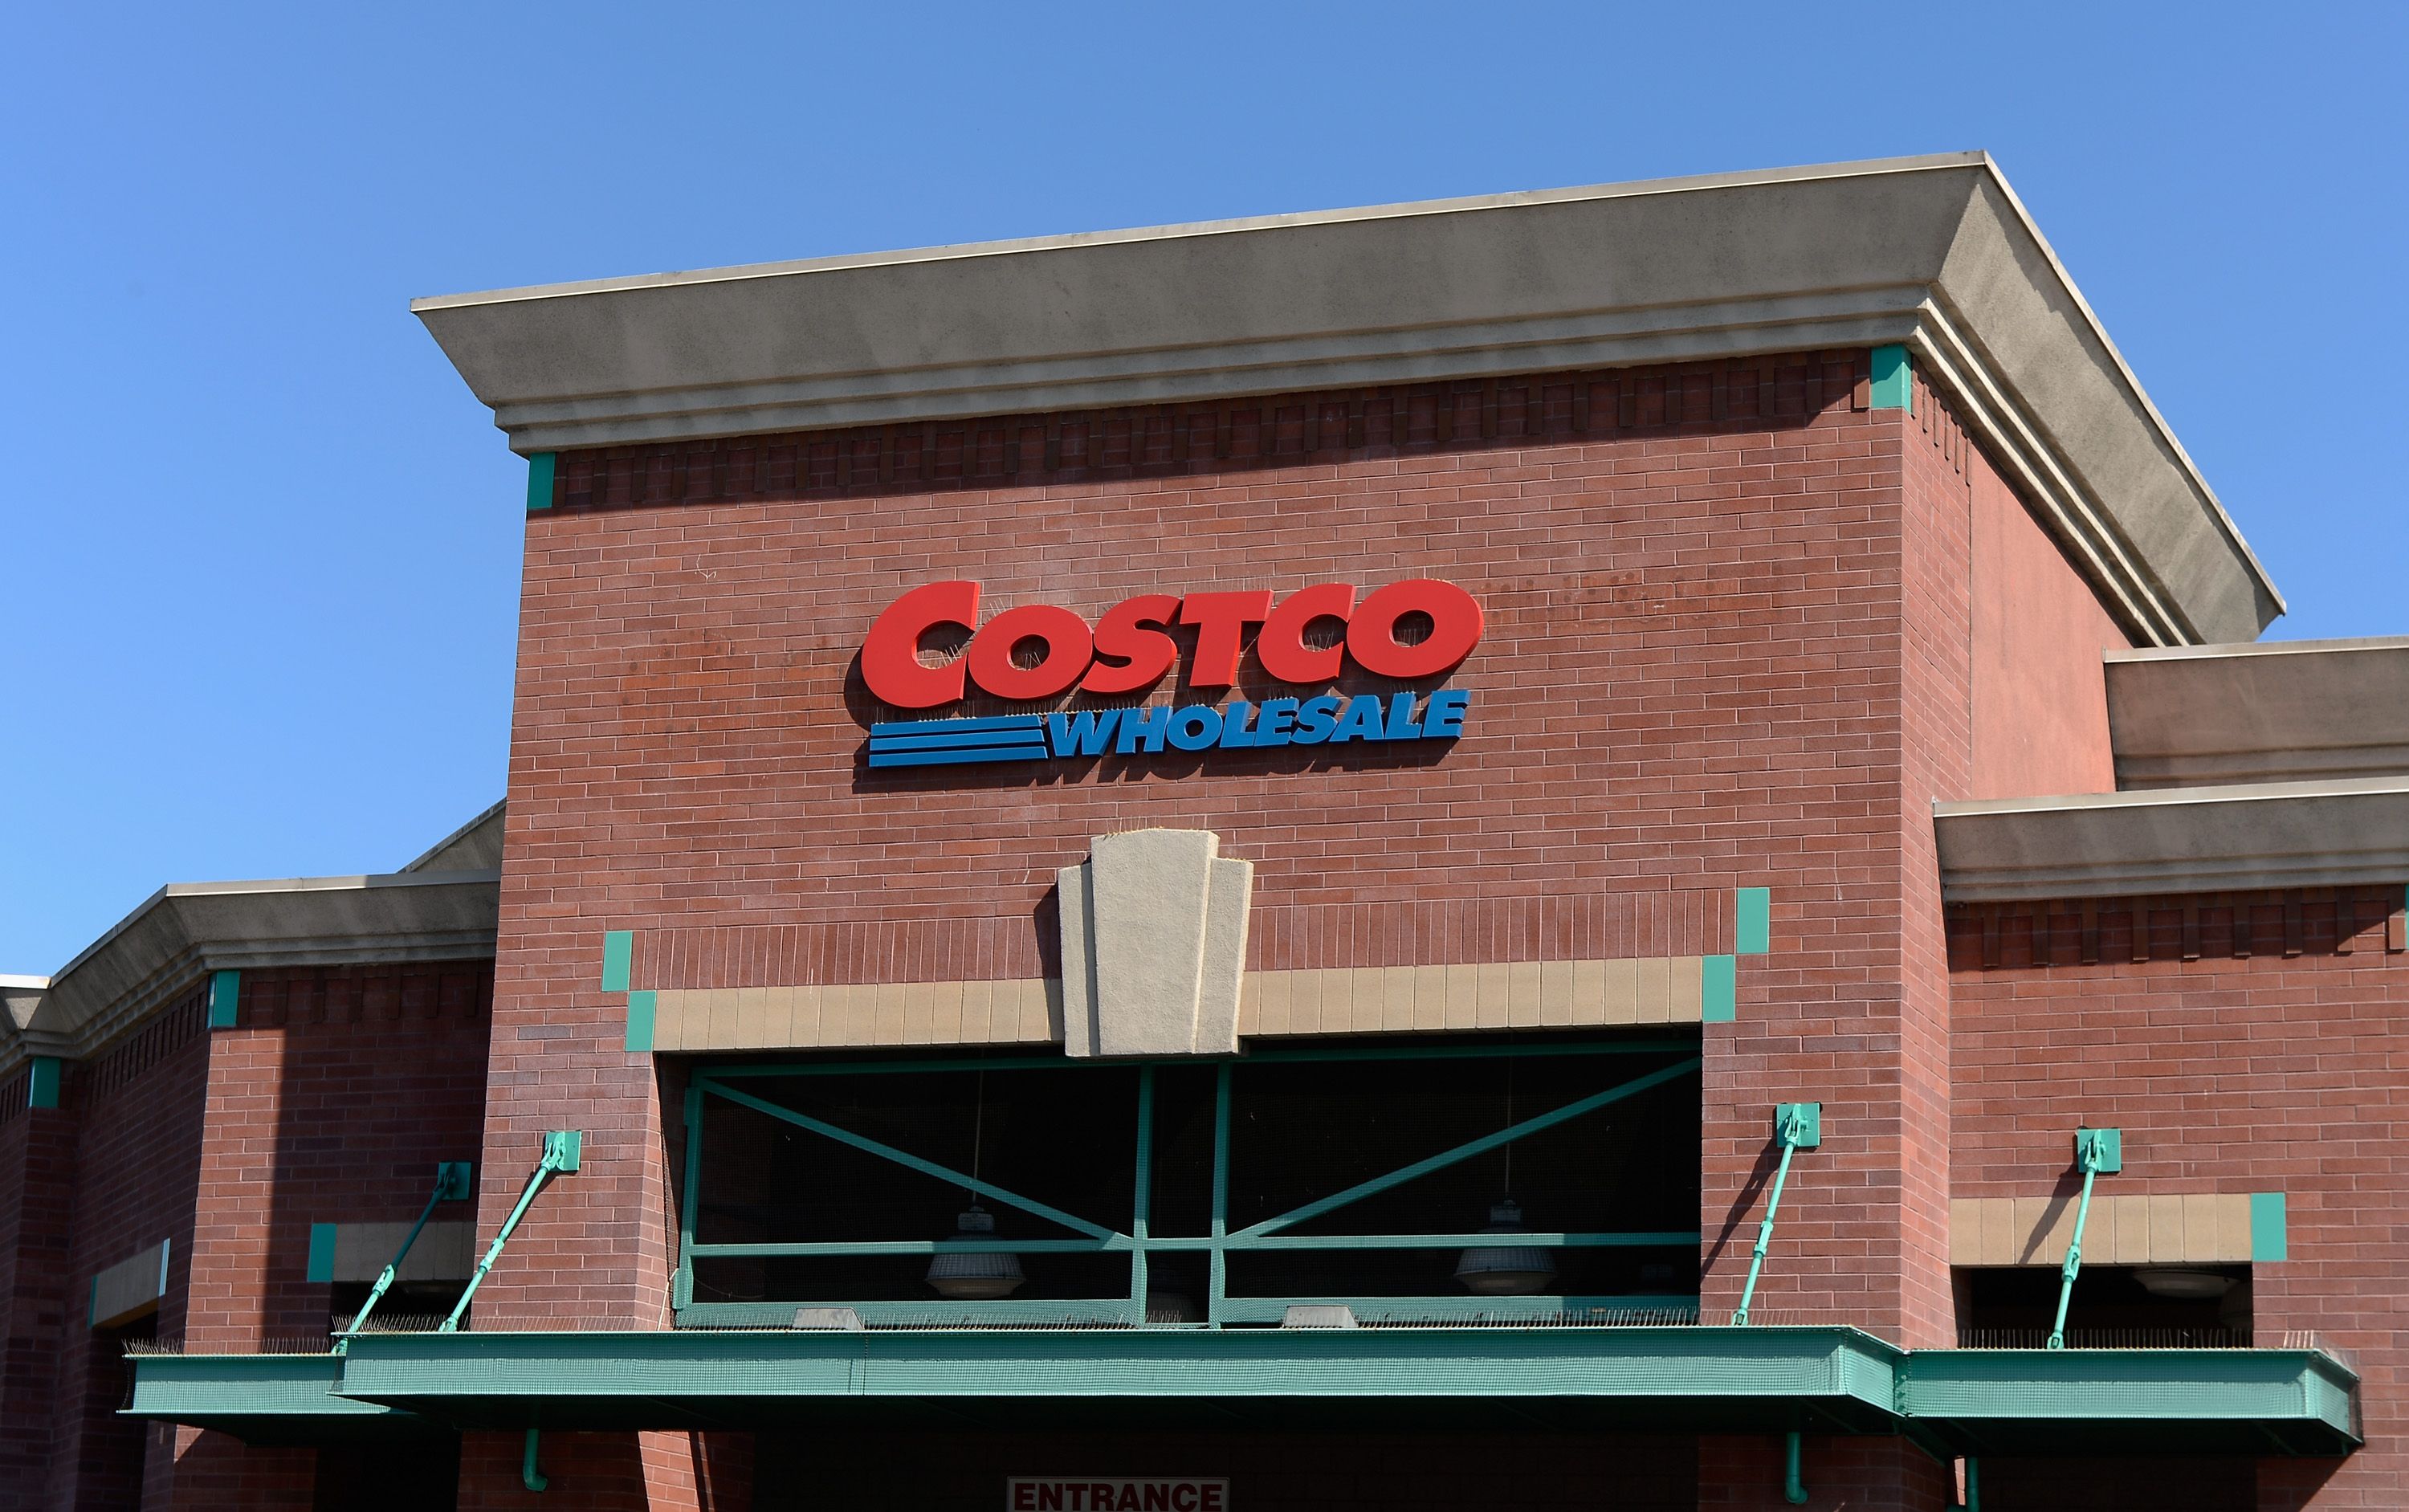 Costco Pavilion Center Open On Christmas Day 2022 Costco Christmas Eve Hours 2021 - Is Costco Open On Christmas Eve?